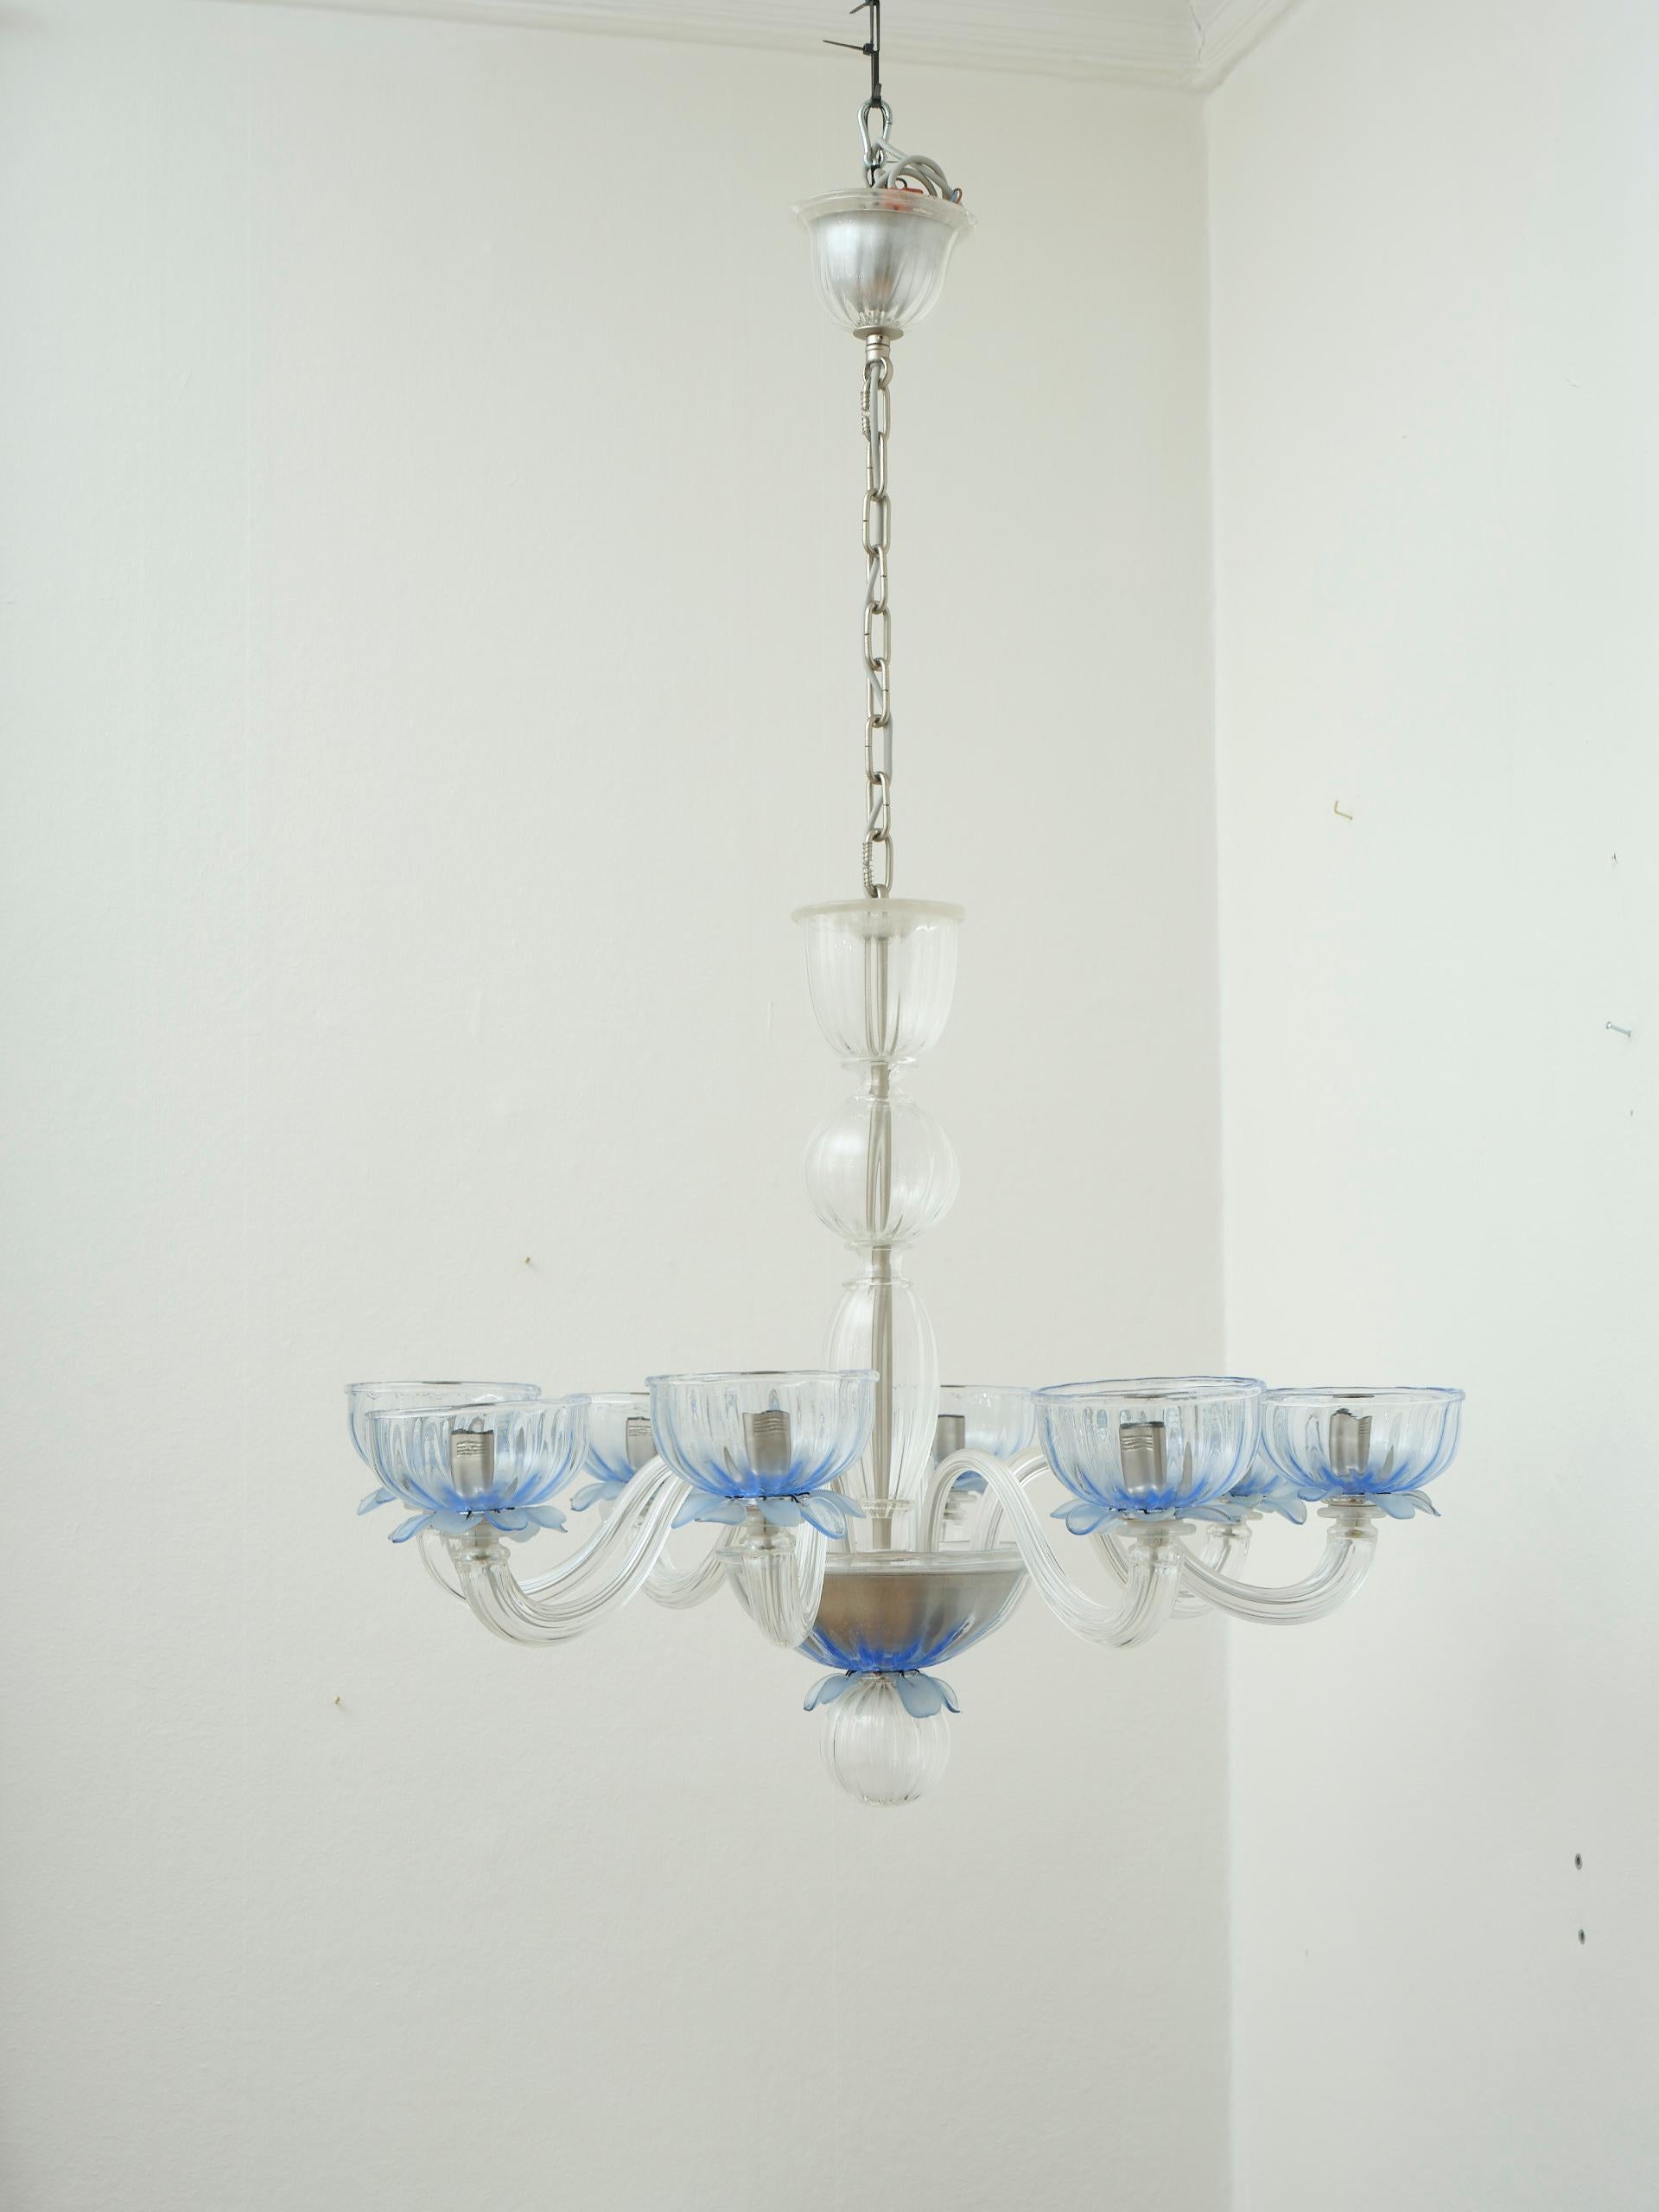 Giant European glass chandelier 8 arms blue details in the style of Murano For Sale 9